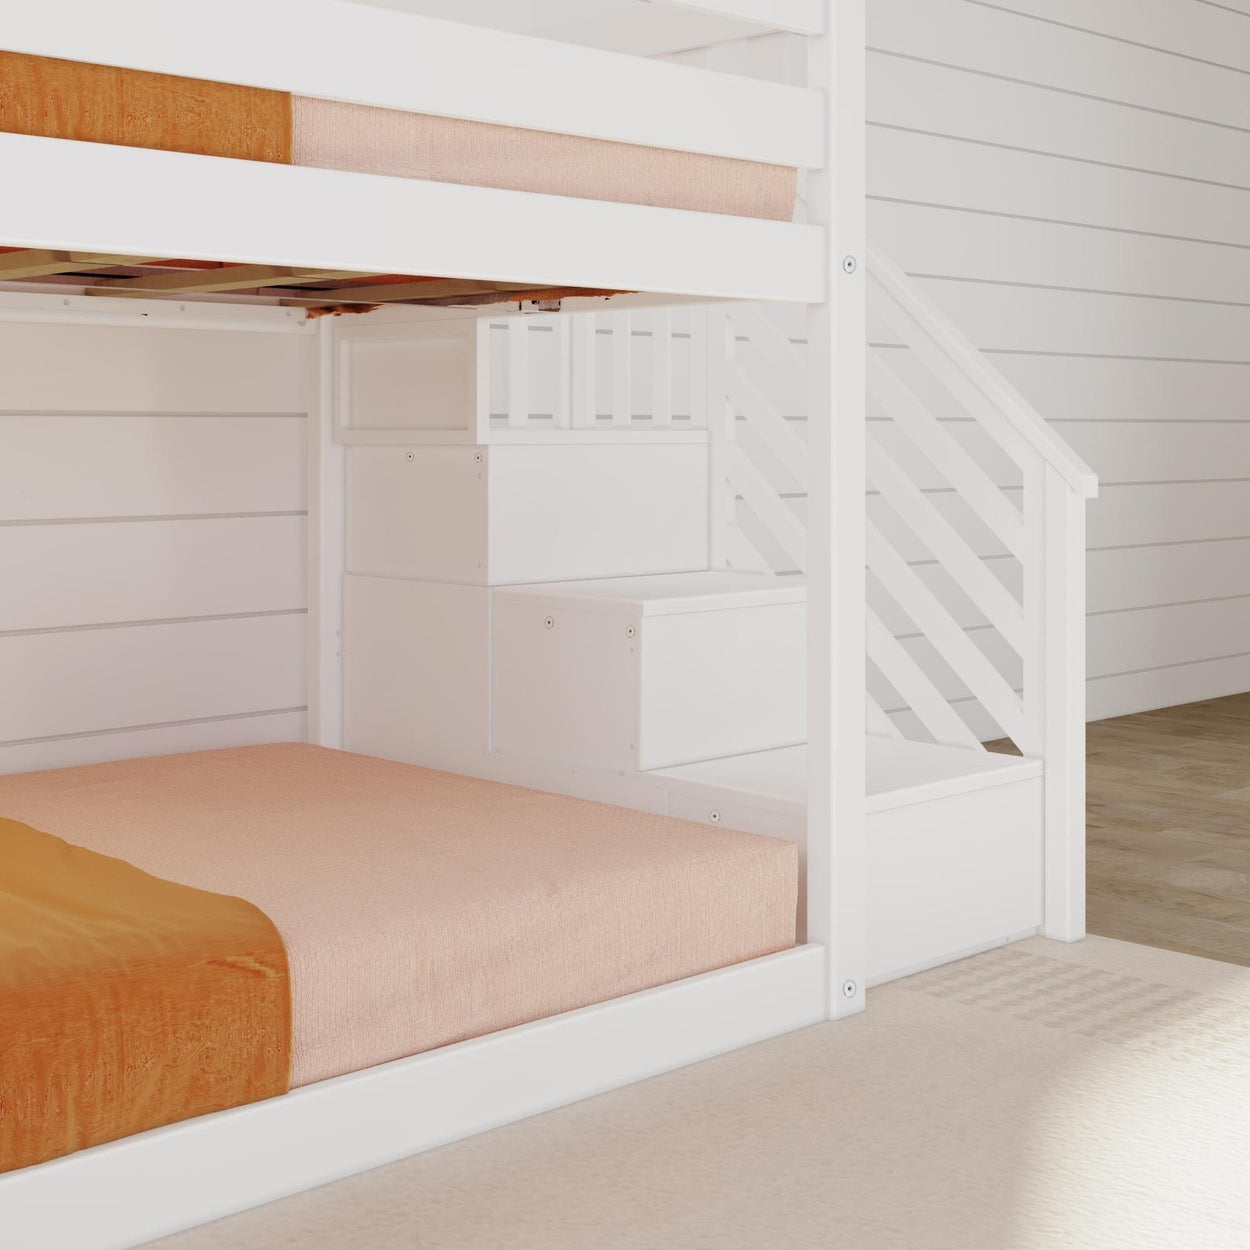 185421-002 : Bunk Beds Classic Low Bunk with Stairs and Easy Slide, White